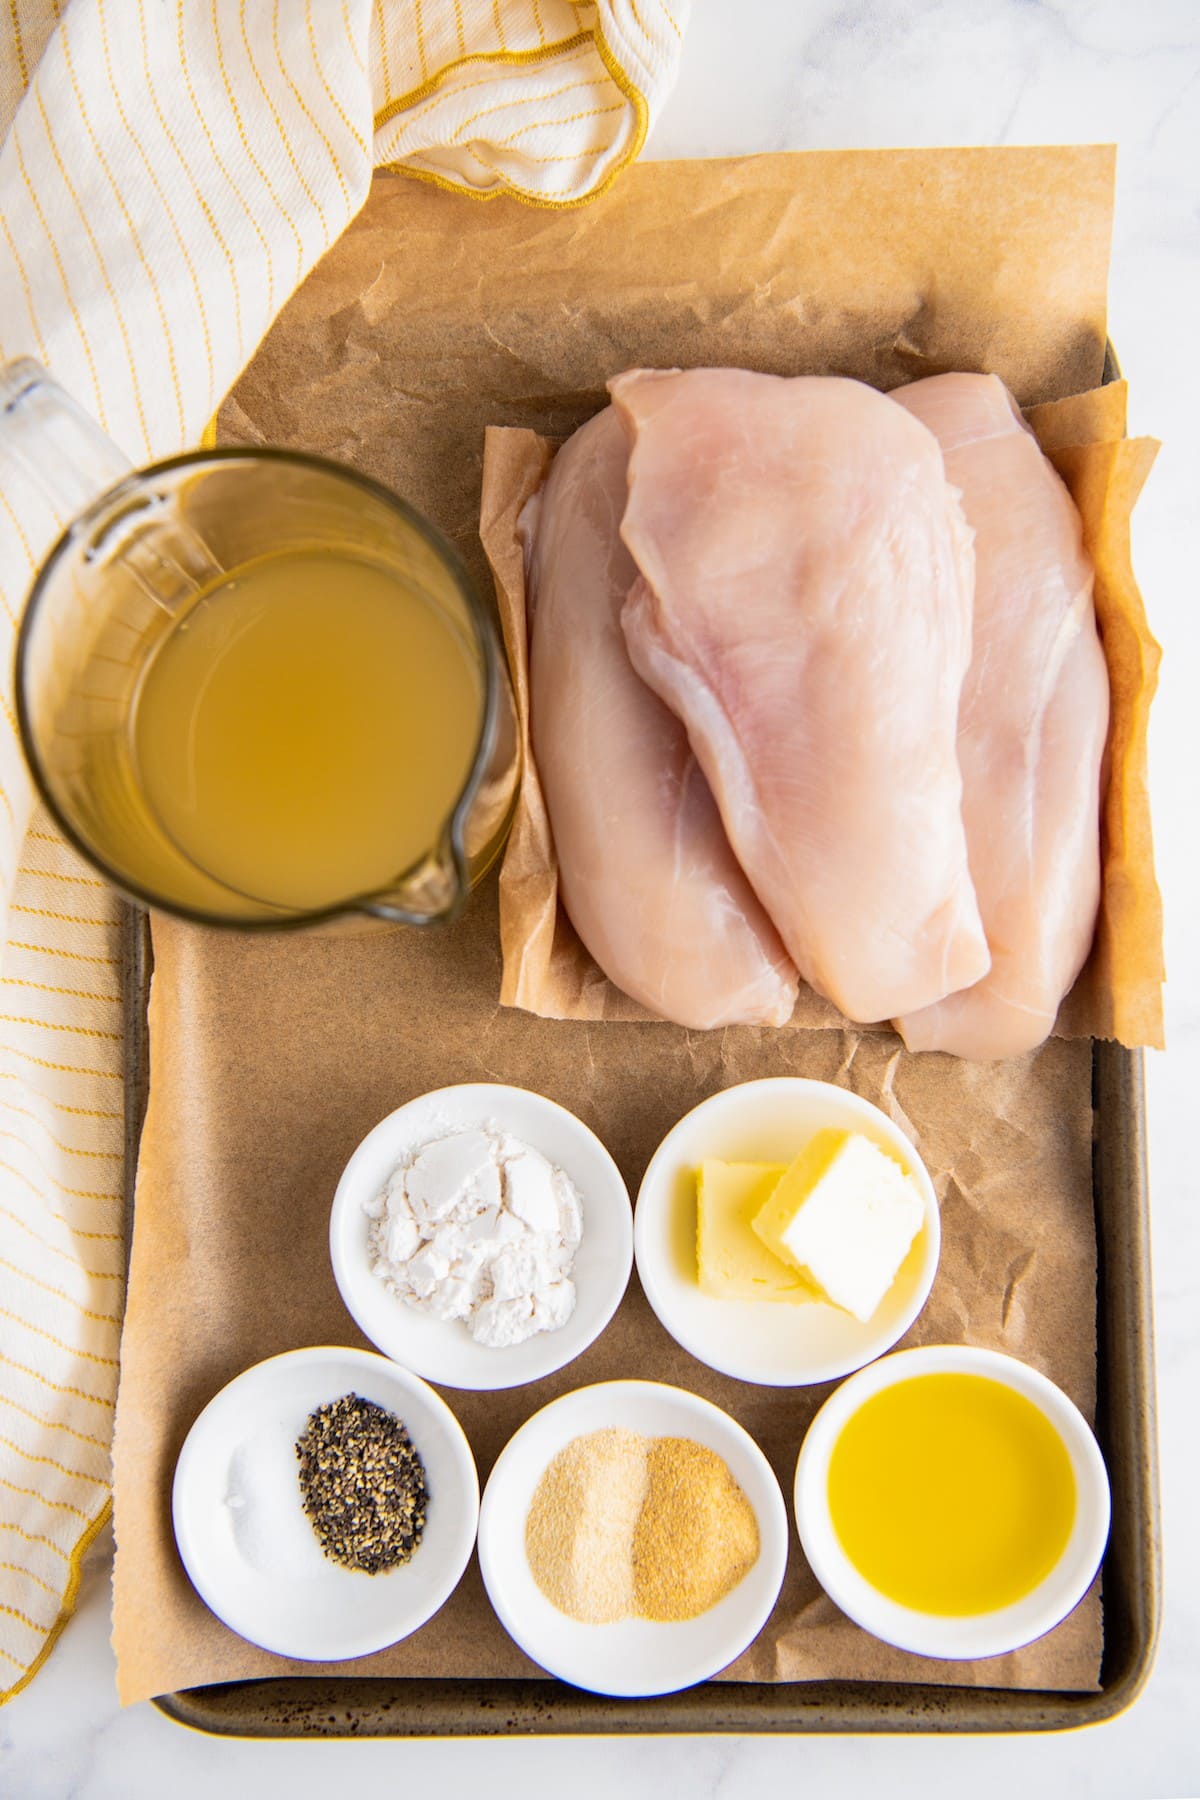 Overhead view of the ingredients needed to make chicken and gravy: a pile of raw chicken breasts, a pyrex of chicken broth, a bowl of flour, a bowl of butter, a bowl of oil, a bowl of salt and pepper, and a bowl of granulated garlic and onion powder